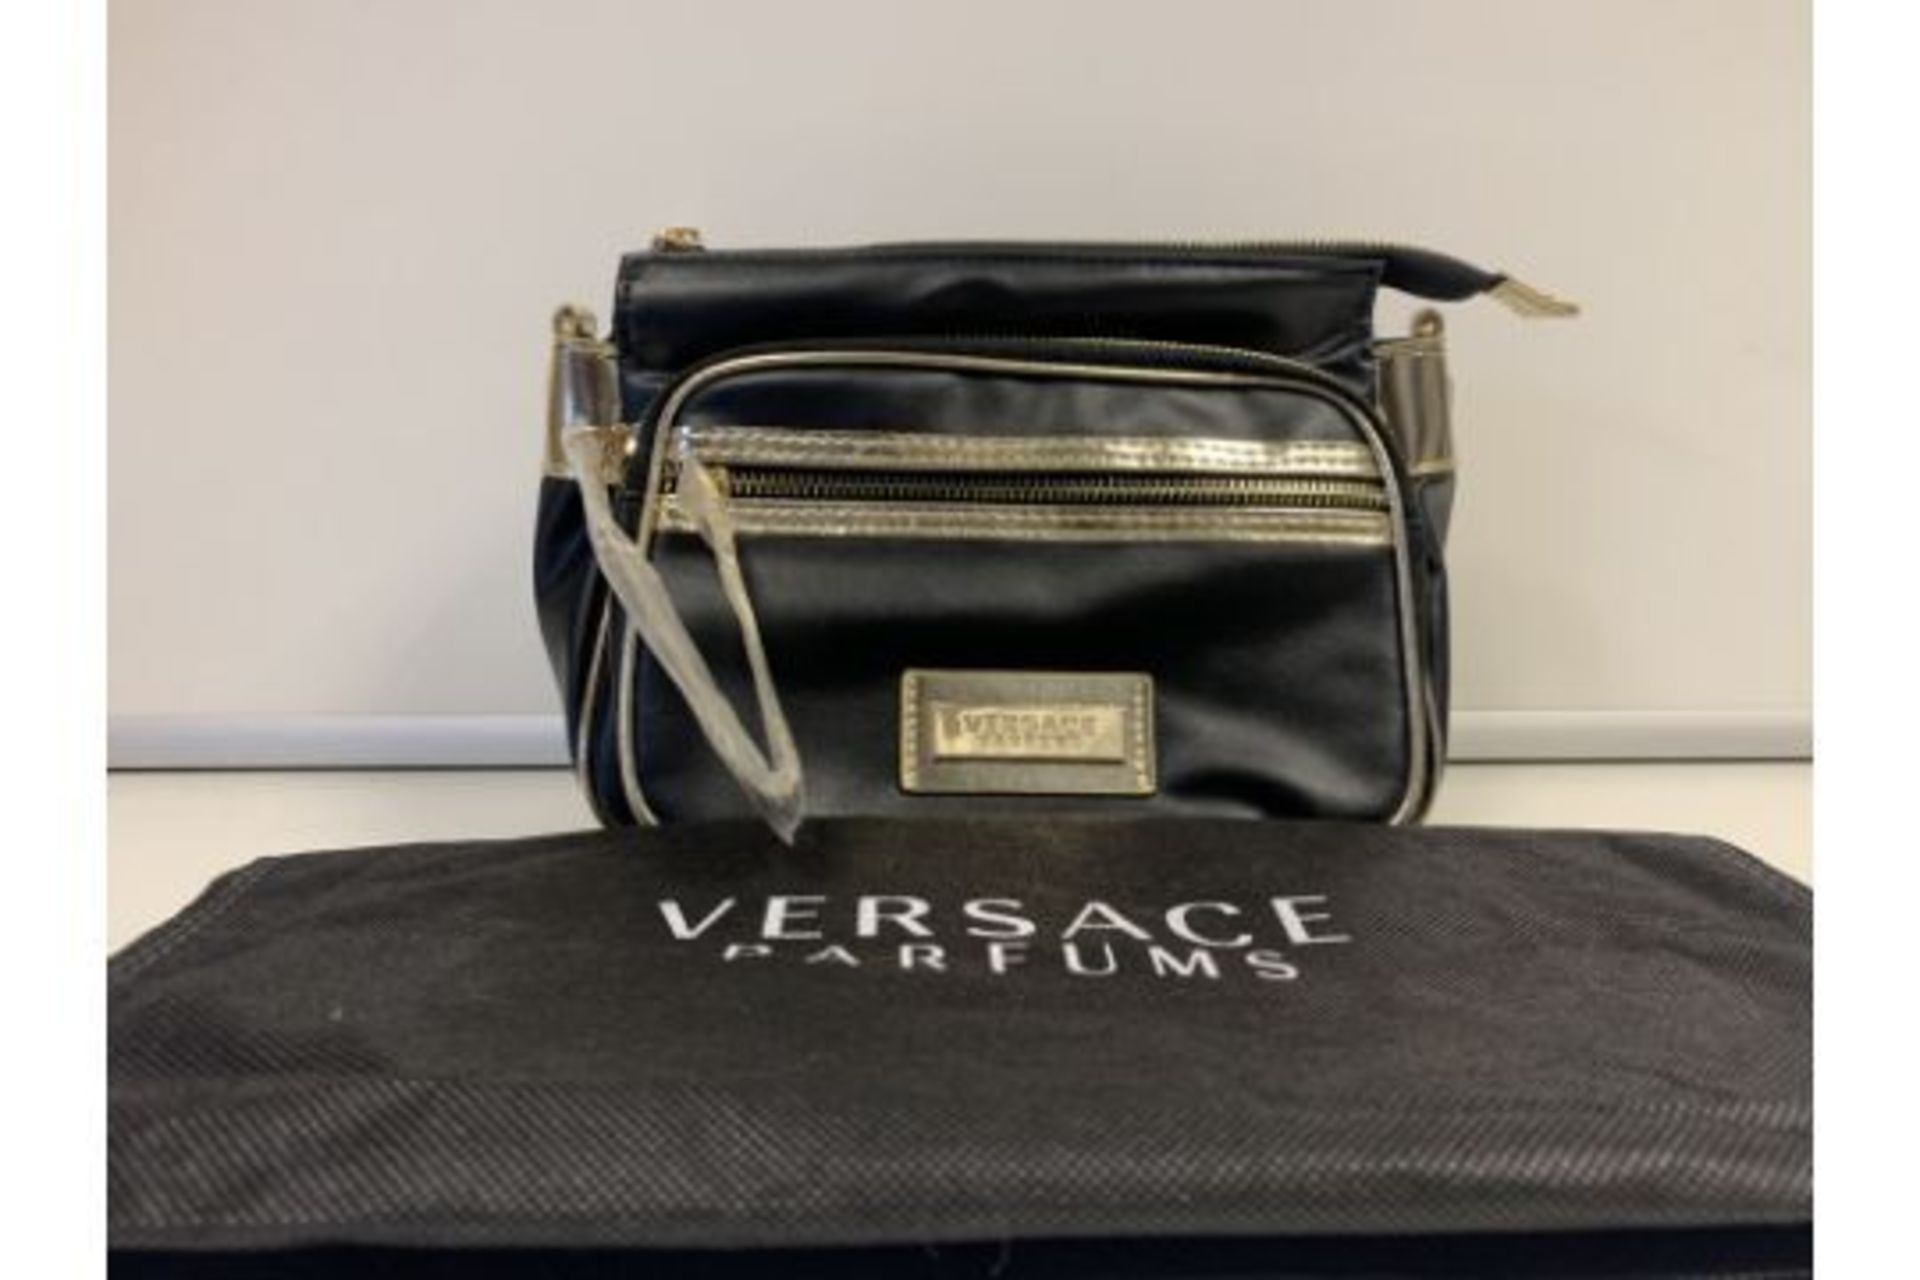 3 X BRAND NEW VERSACE PARFUMS BAG WITH ATTACHABLE STRAP